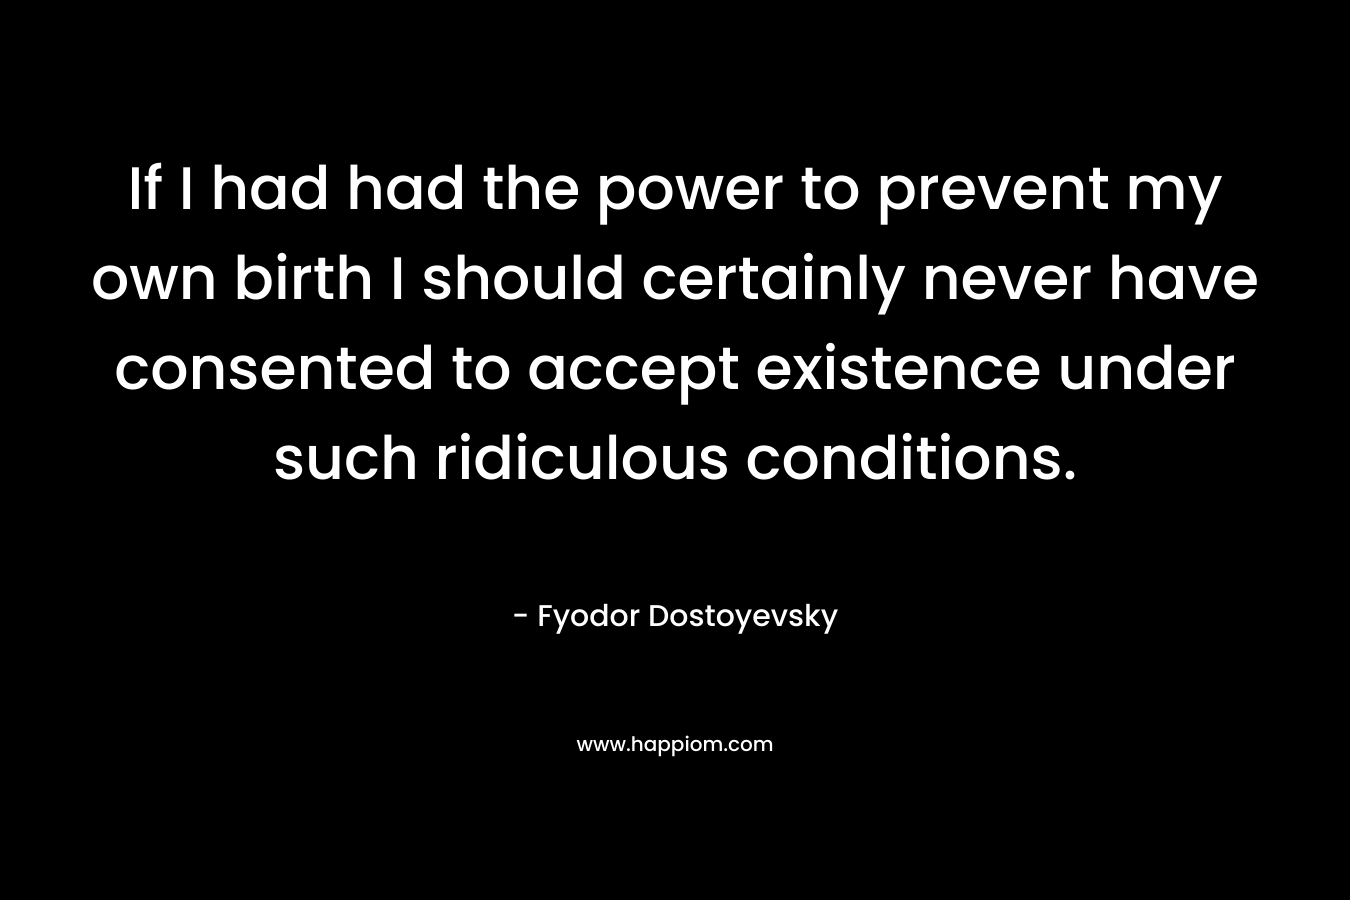 If I had had the power to prevent my own birth I should certainly never have consented to accept existence under such ridiculous conditions.